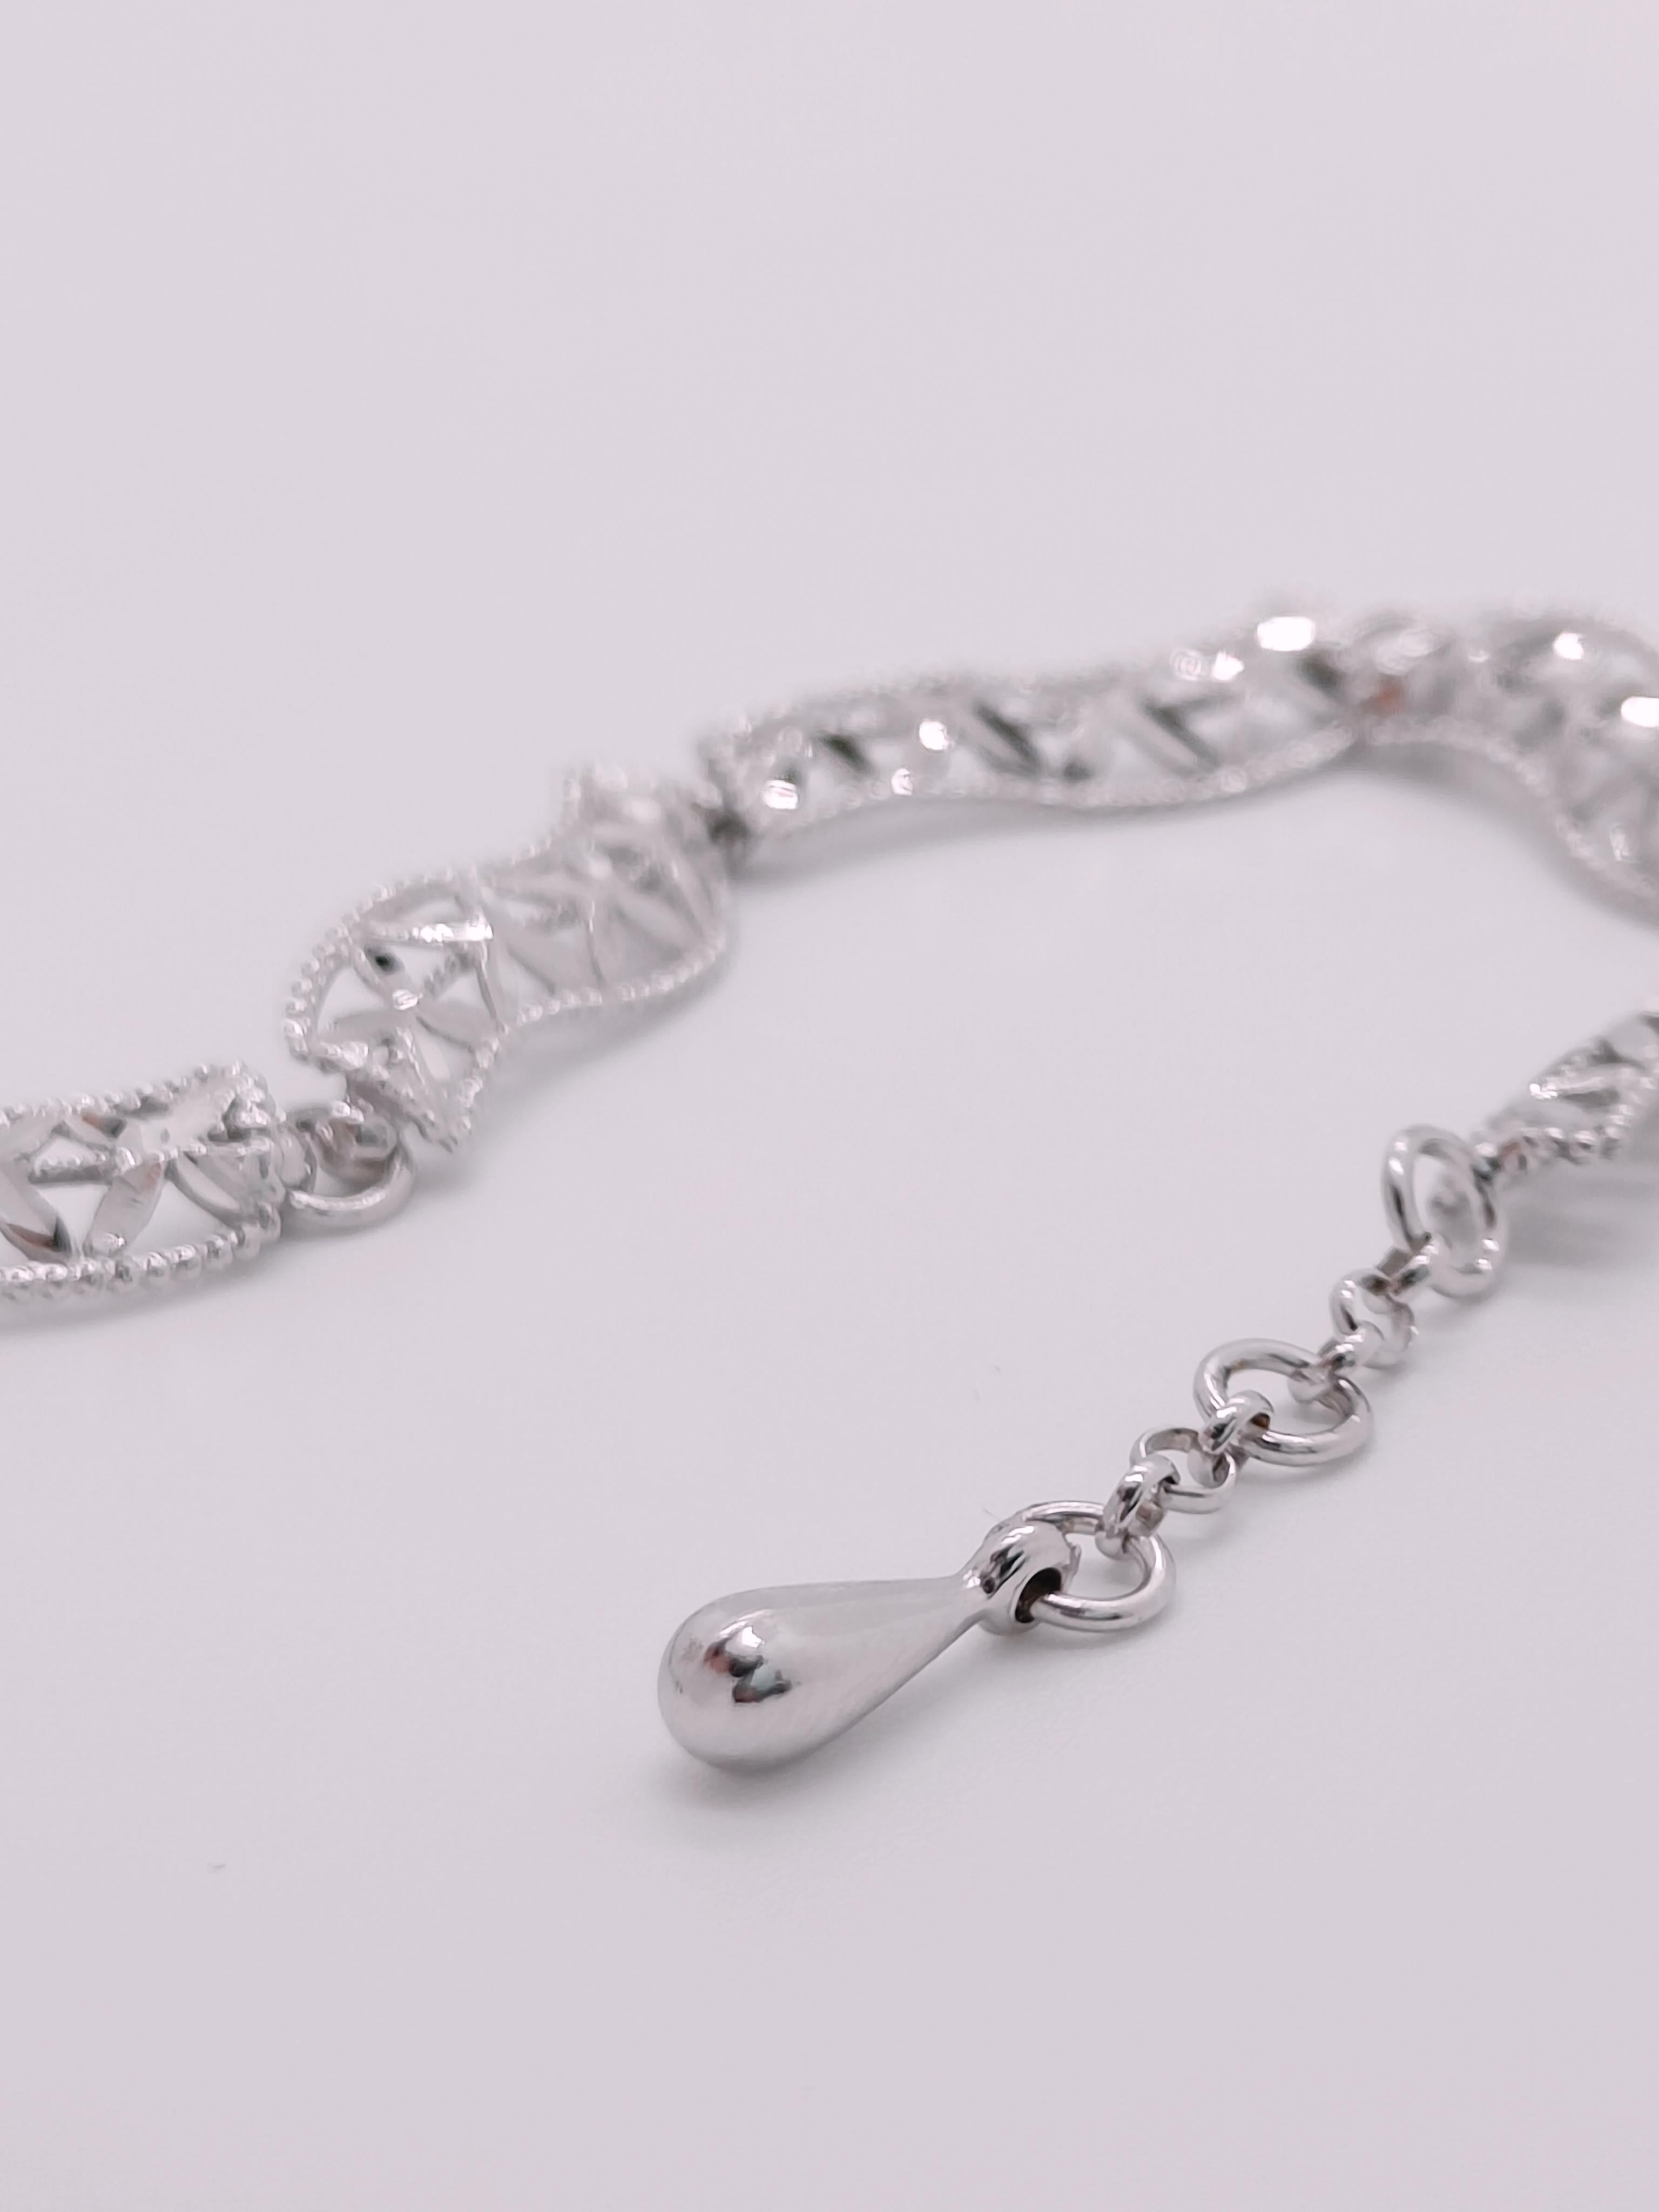 White gold bracelet 18k with workmanship that makes it bright In New Condition For Sale In Fara Filiorum Petri, IT